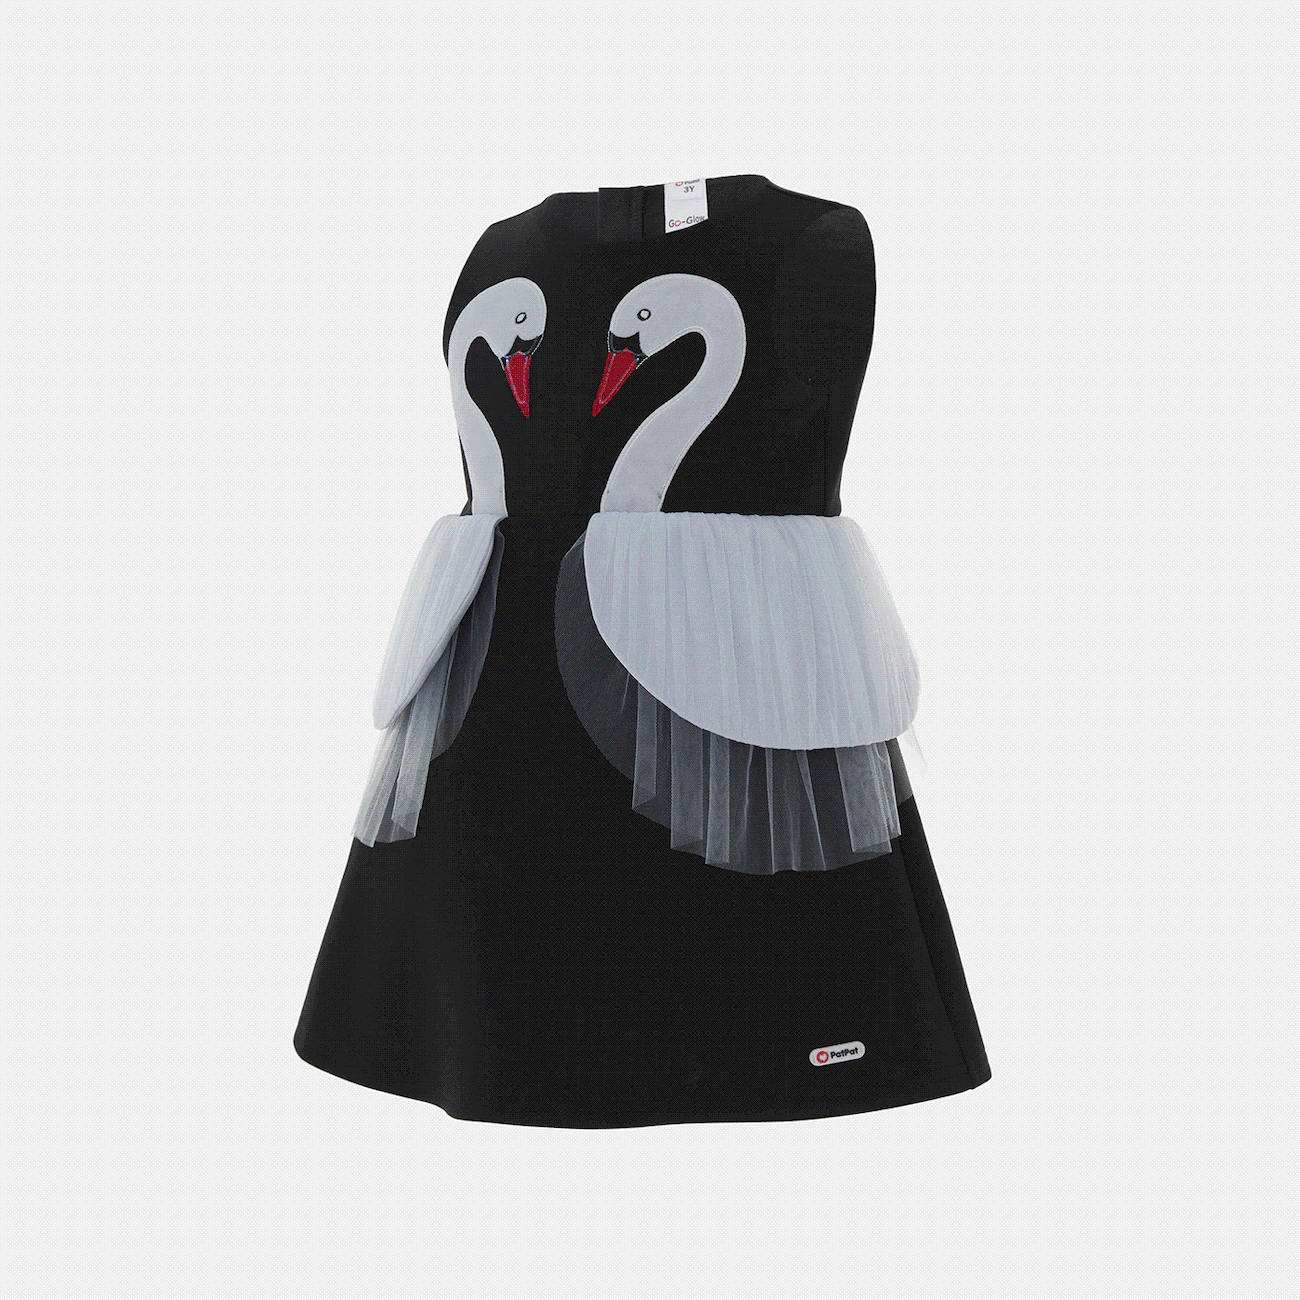 Go-Glow Illuminating Sleeveless Dress with 3D Light Up Swan Including Controller (Built-In Battery) Black big image 1